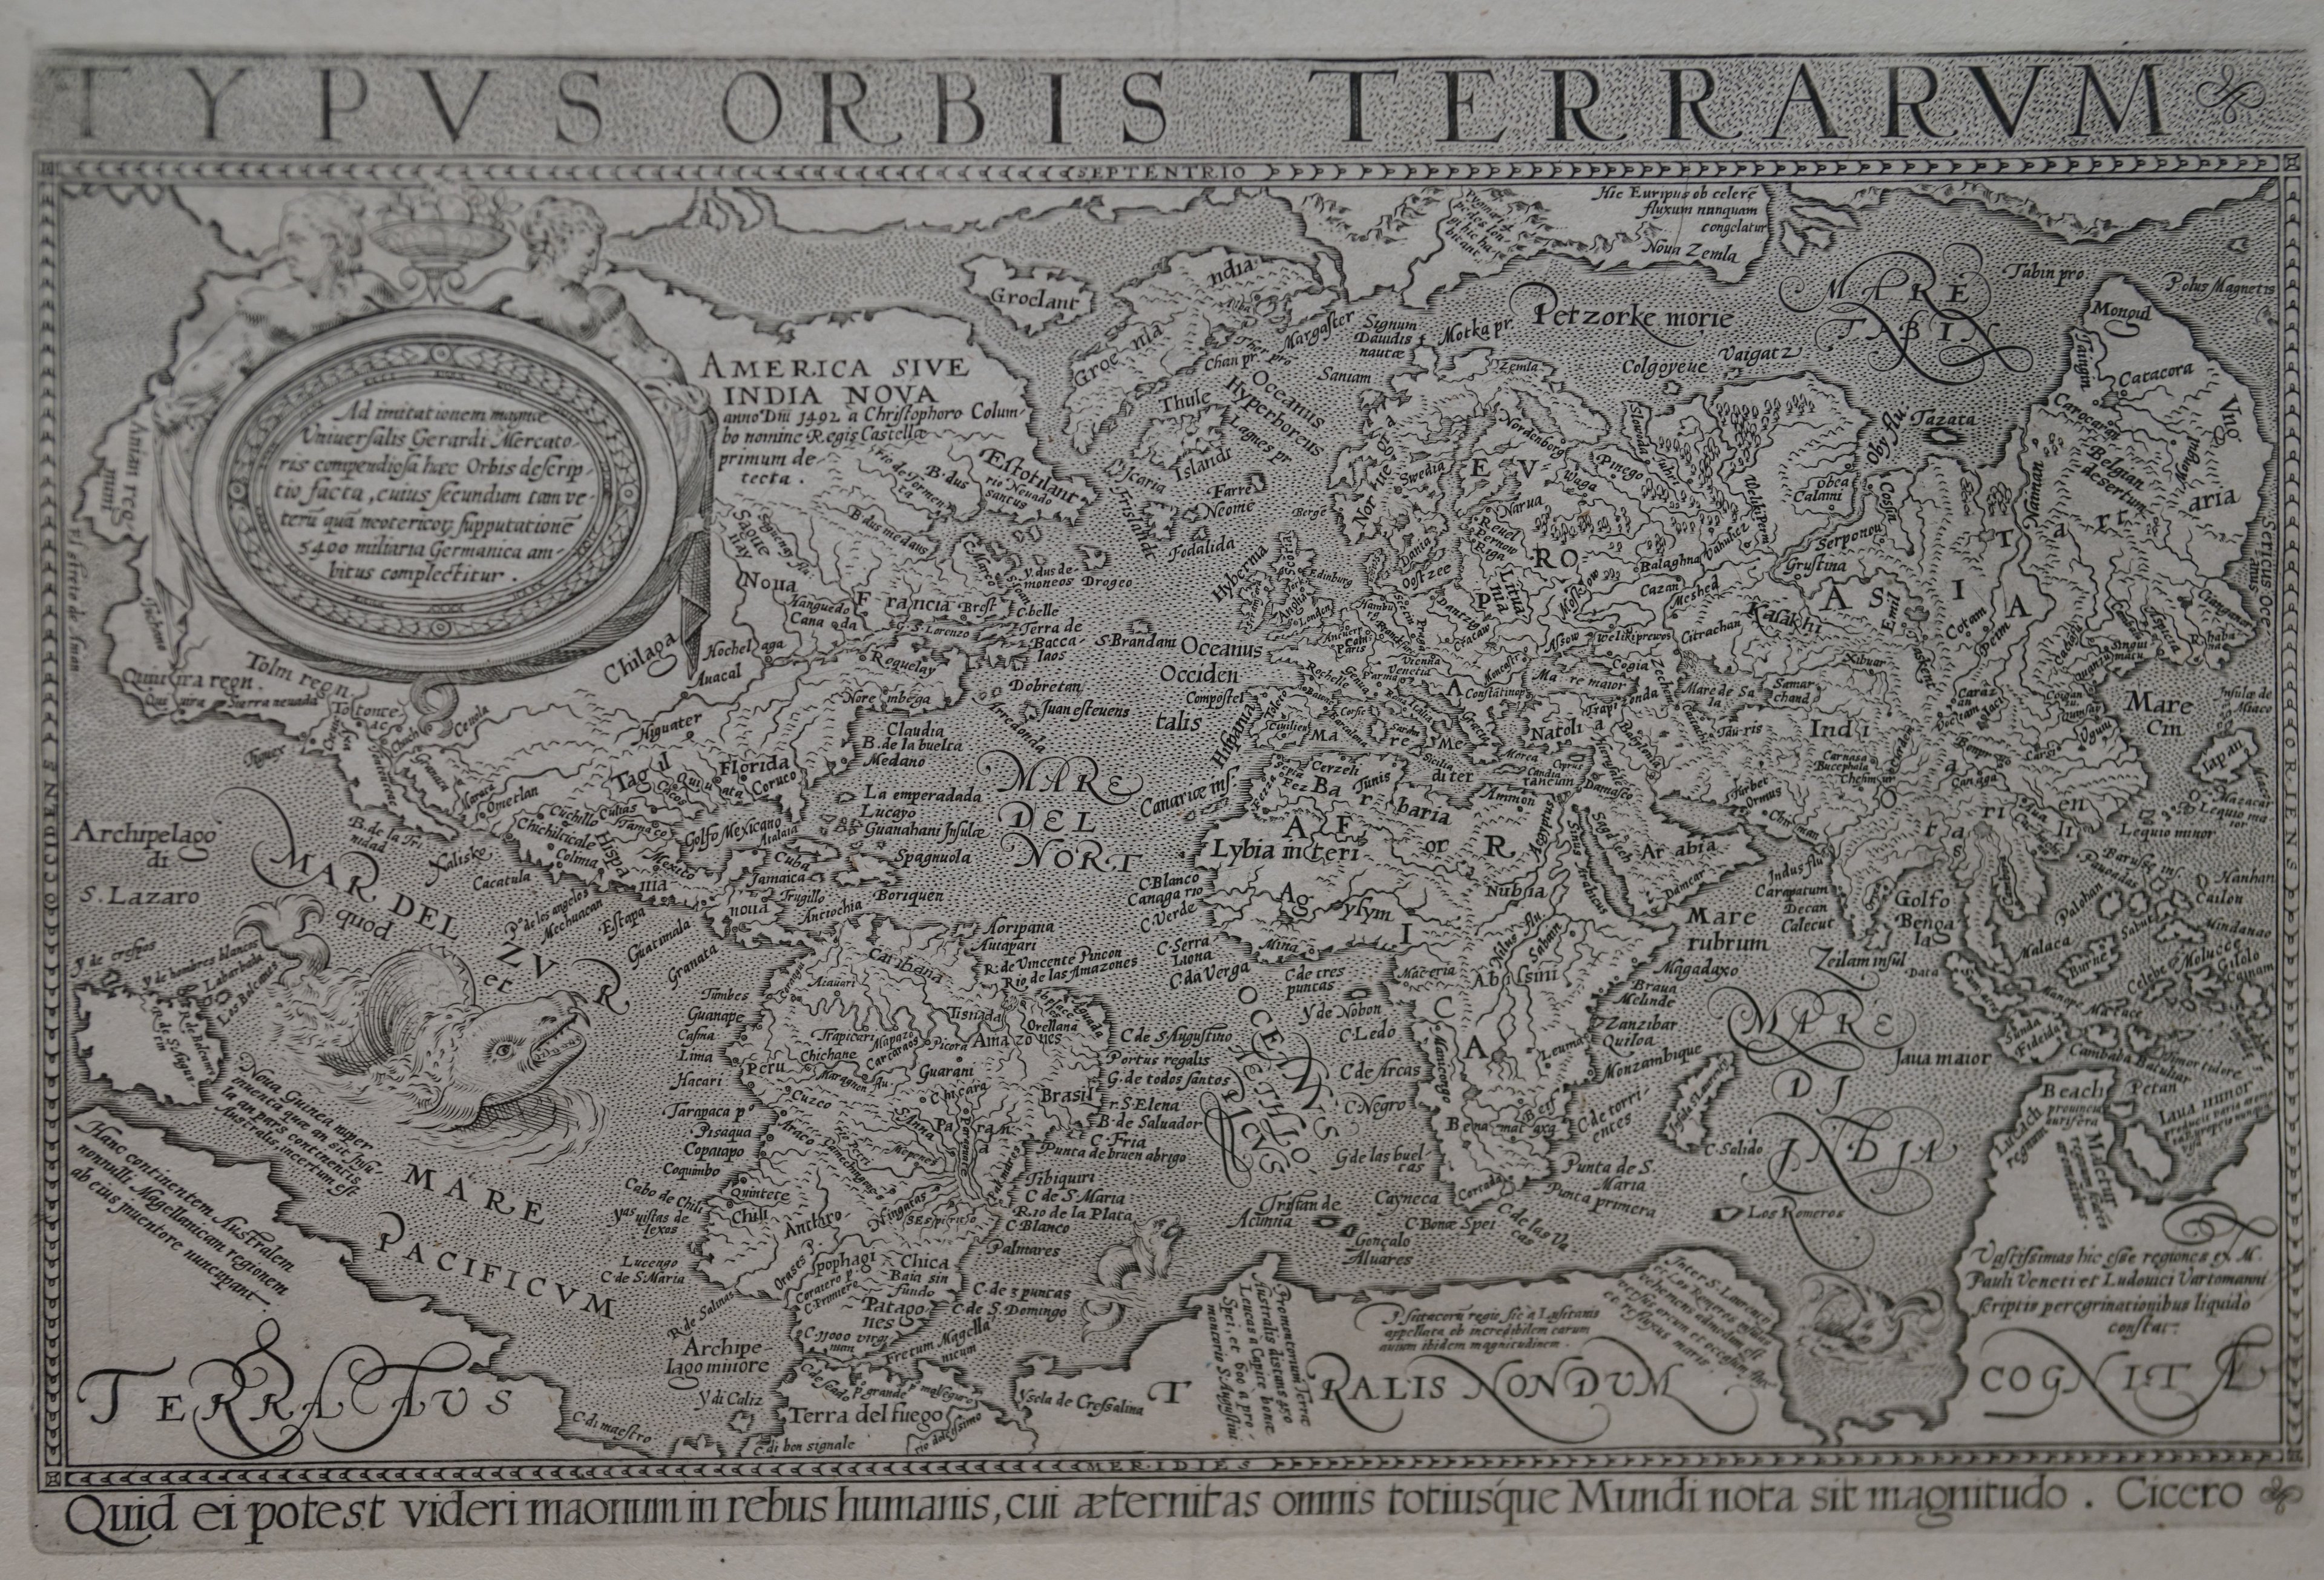 Preview of Lambert Andreas' world map with incredible details, the text along the top of the map reads: Typus Orbis Terrarum